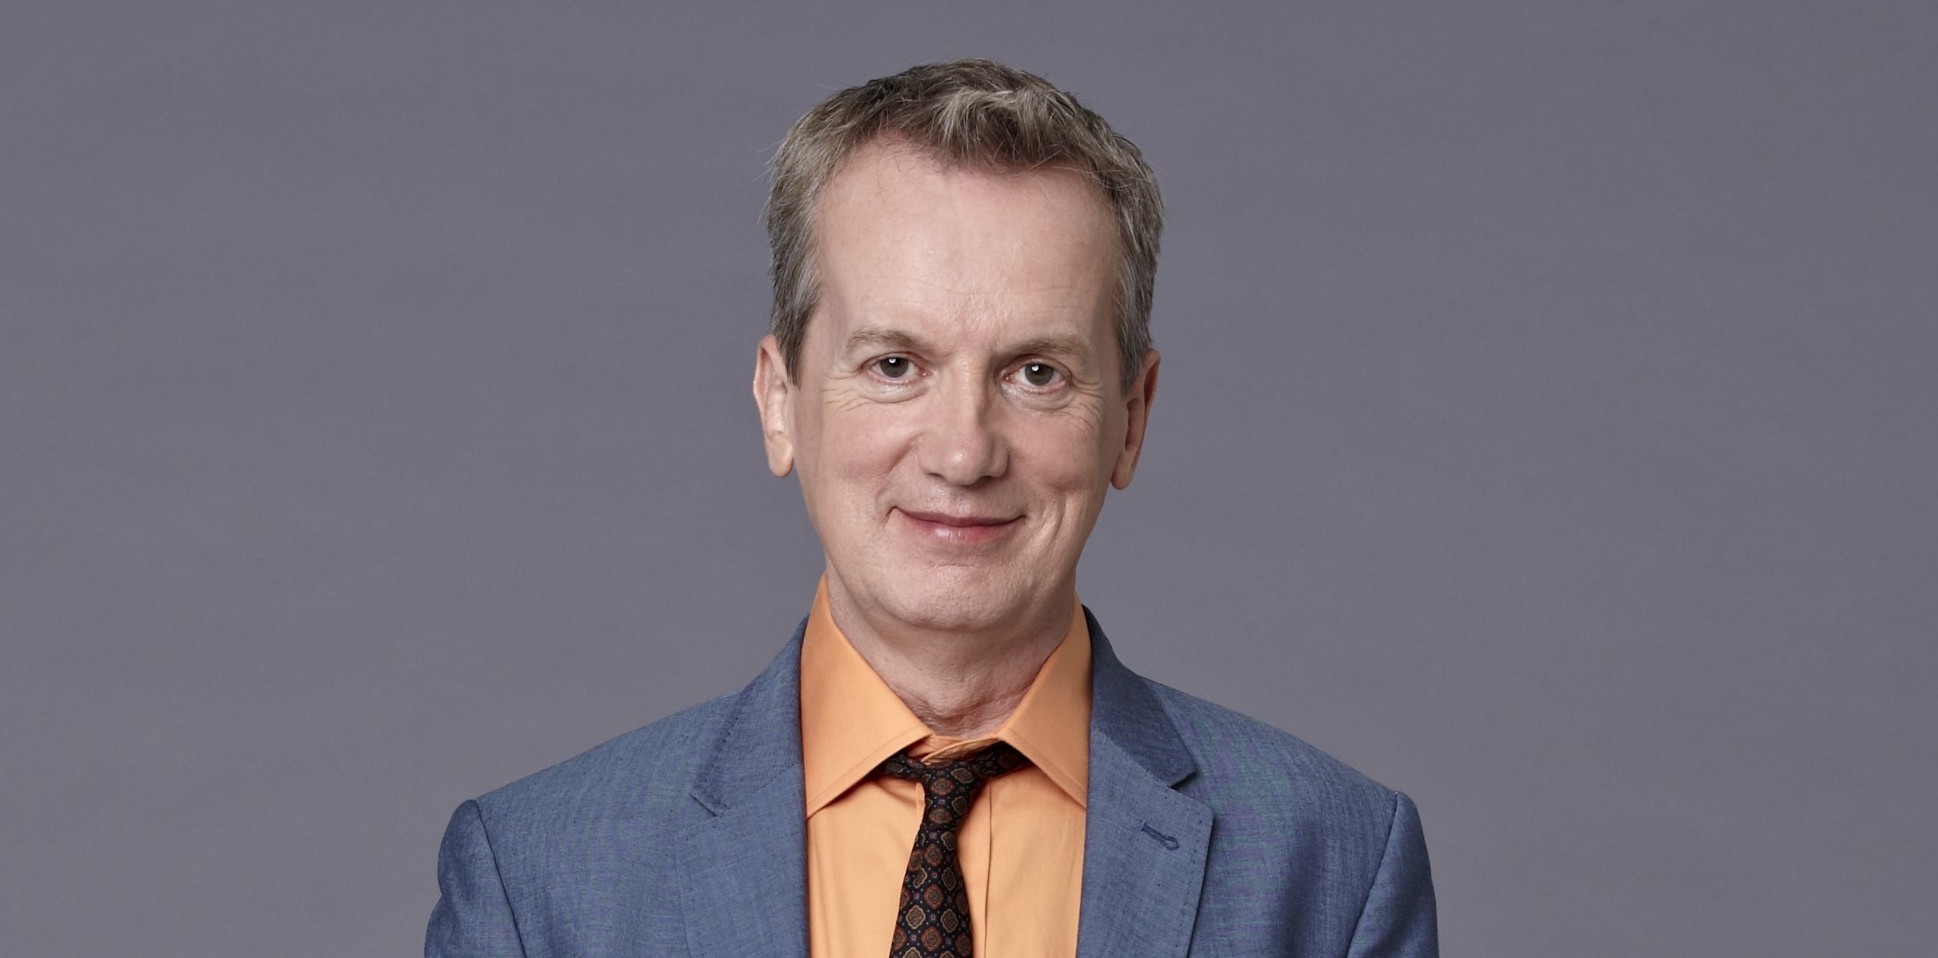 FRANK SKINNER - MAN IN A SUIT